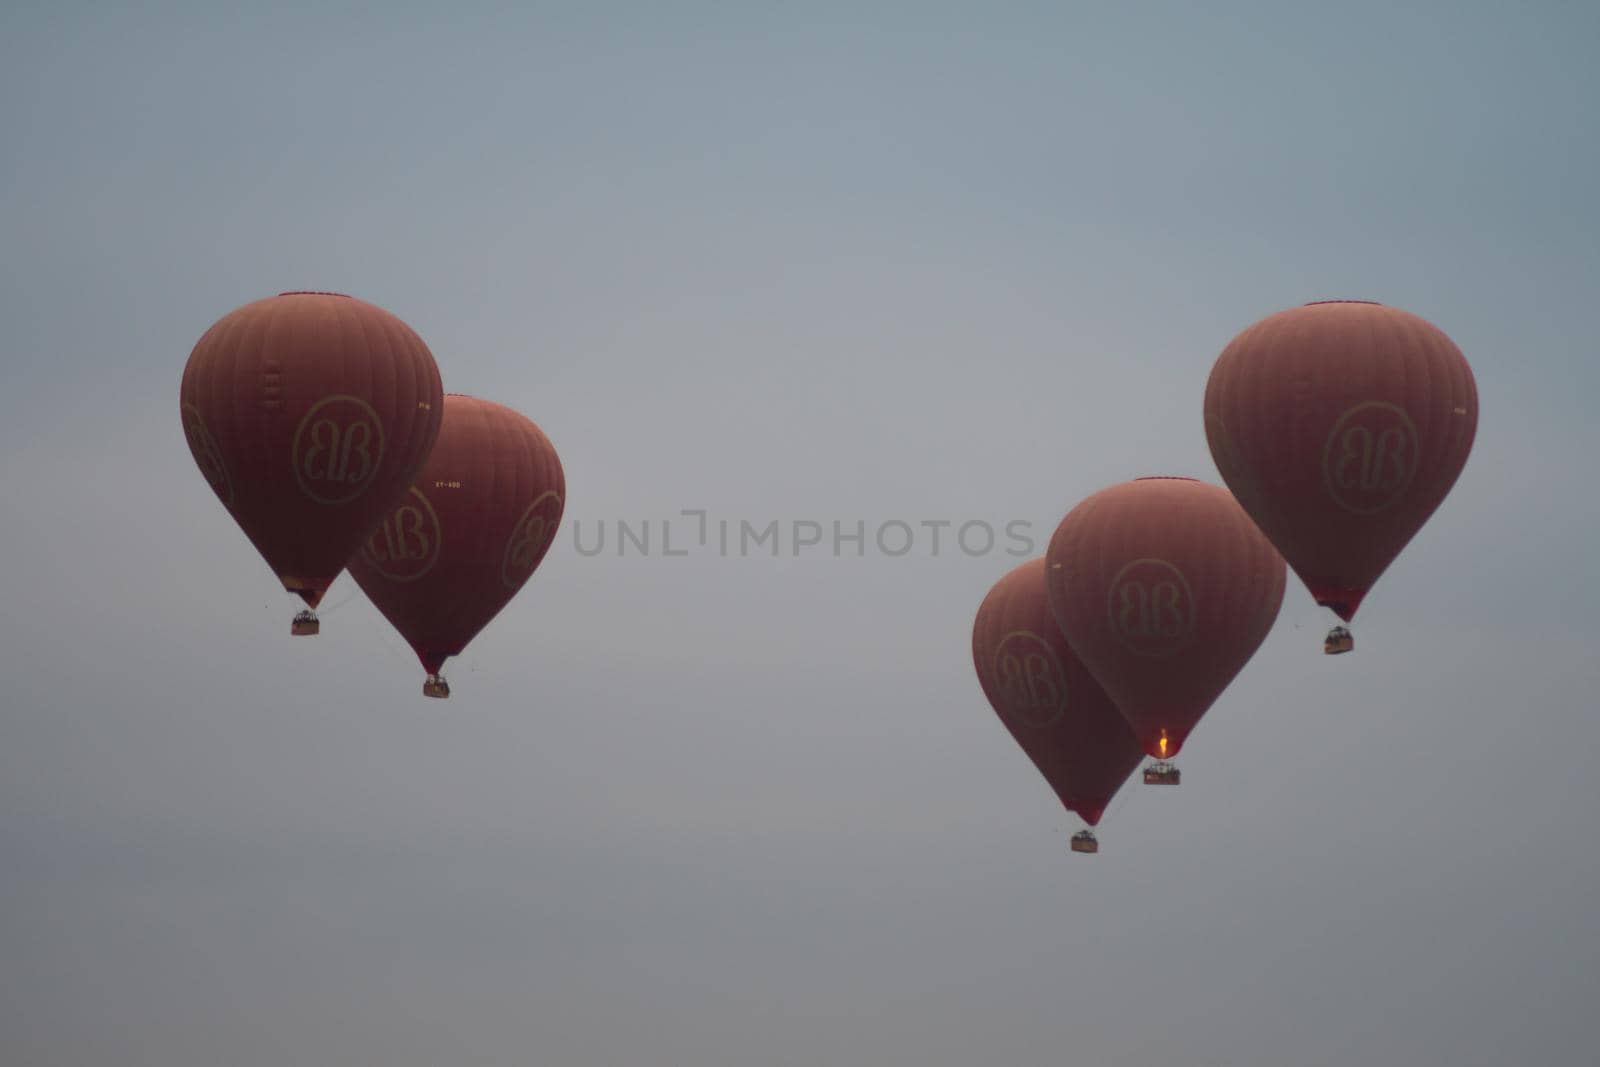 BAGAN, NYAUNG-U, MYANMAR - 2 JANUARY 2020: Five red hot air balloons rises high in the sky together for tourists